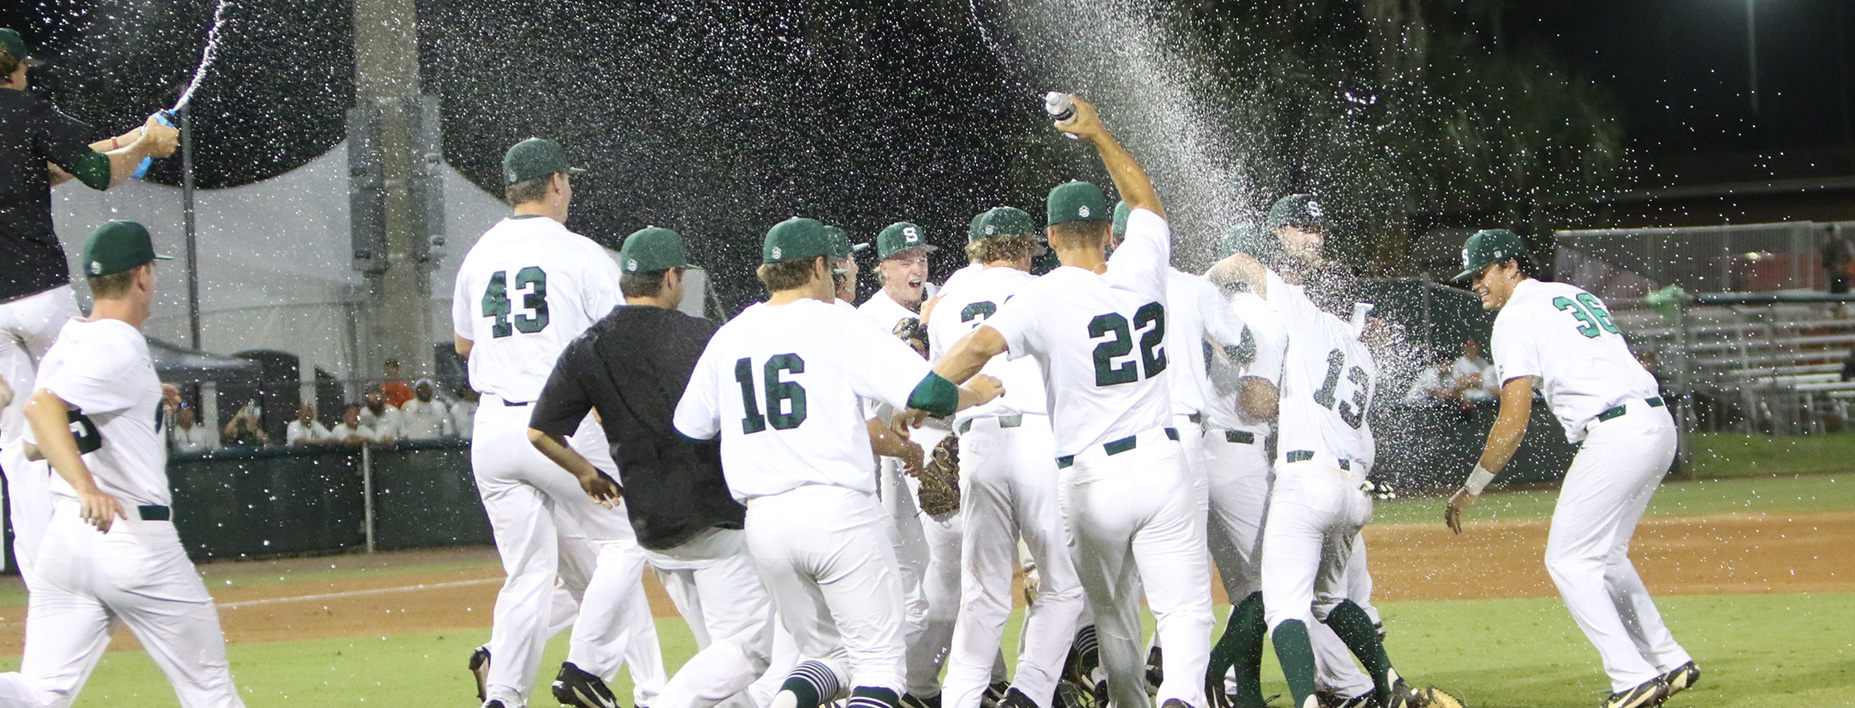 Players jump and spray water on the field after win.